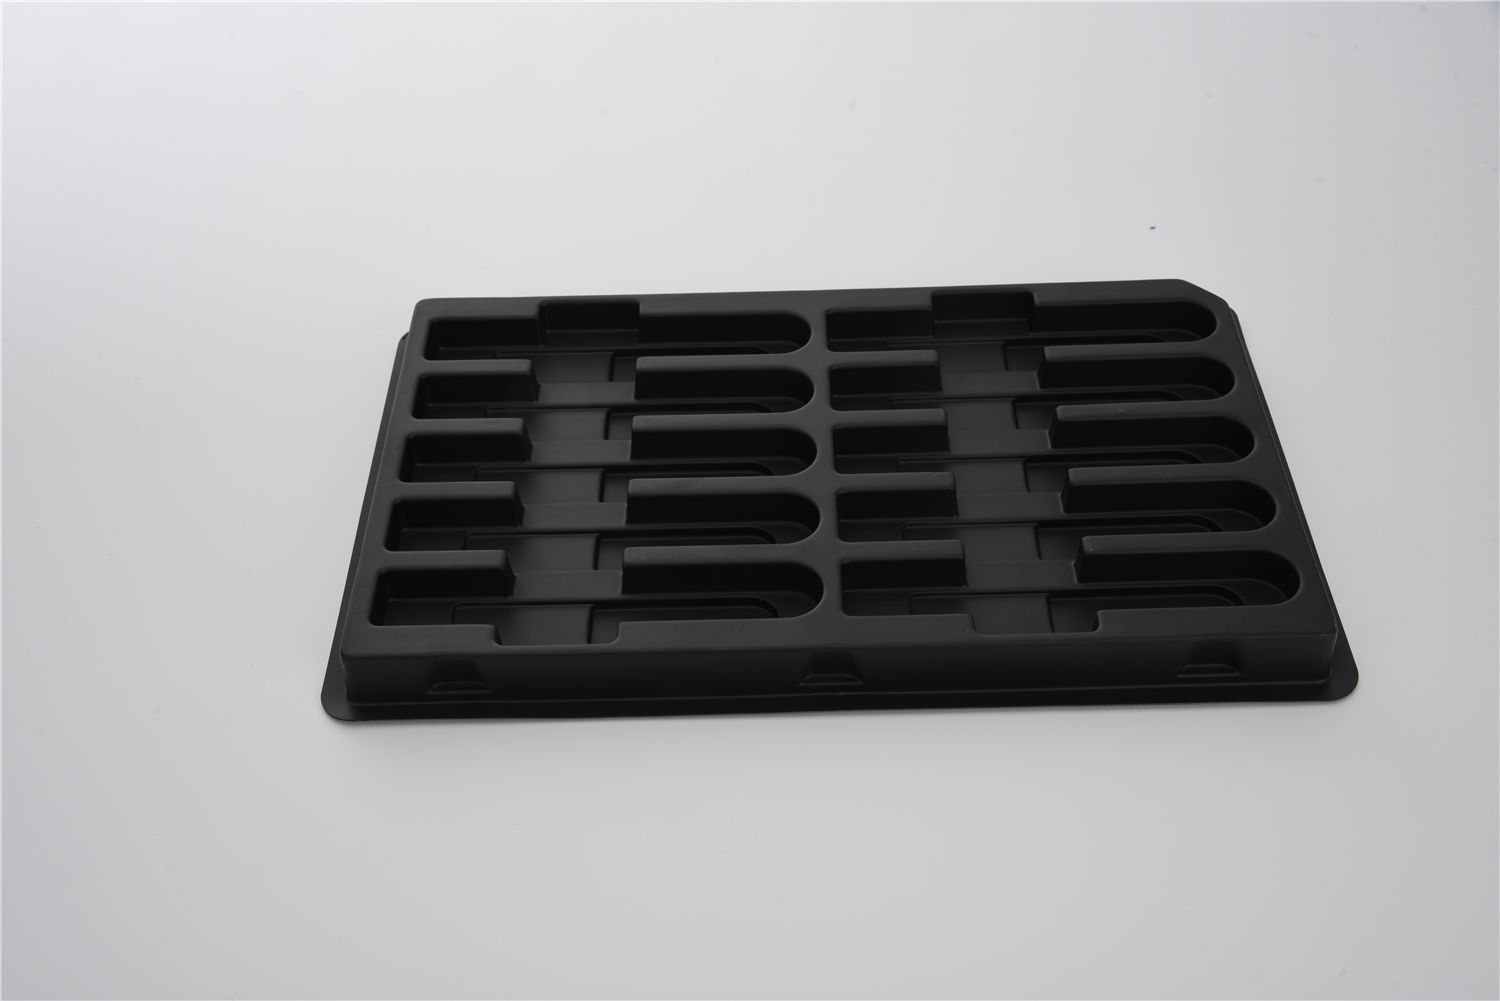 Factory Custom Black PP PS PET ABS Vacuum Formed Tray ESD Plastic Tray Anti-static Packing Tray Blister